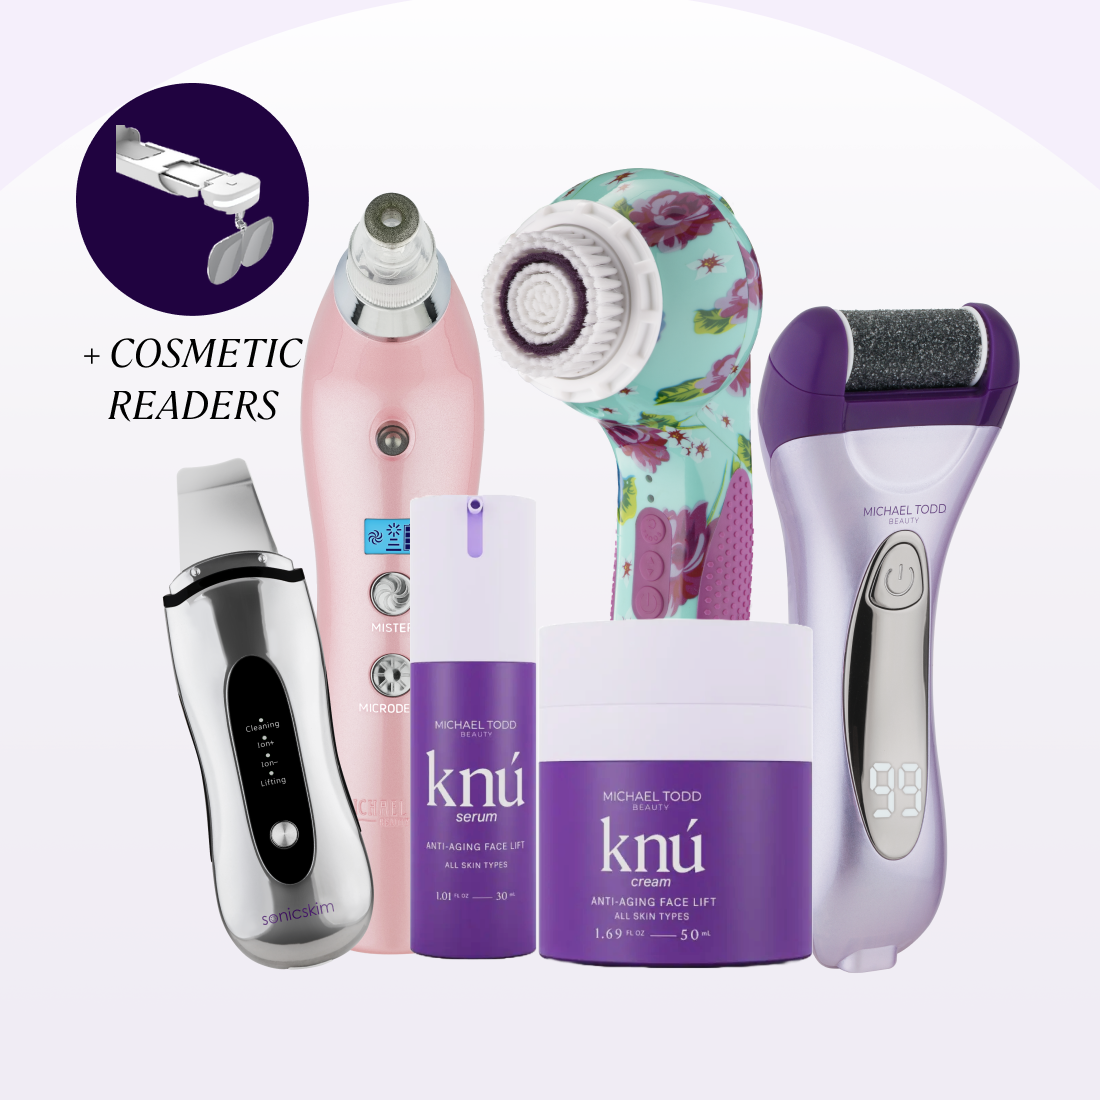 Kunu's top cosmetic removers, including Knú Cream and Michael Todd Beauty's Glow All Day.